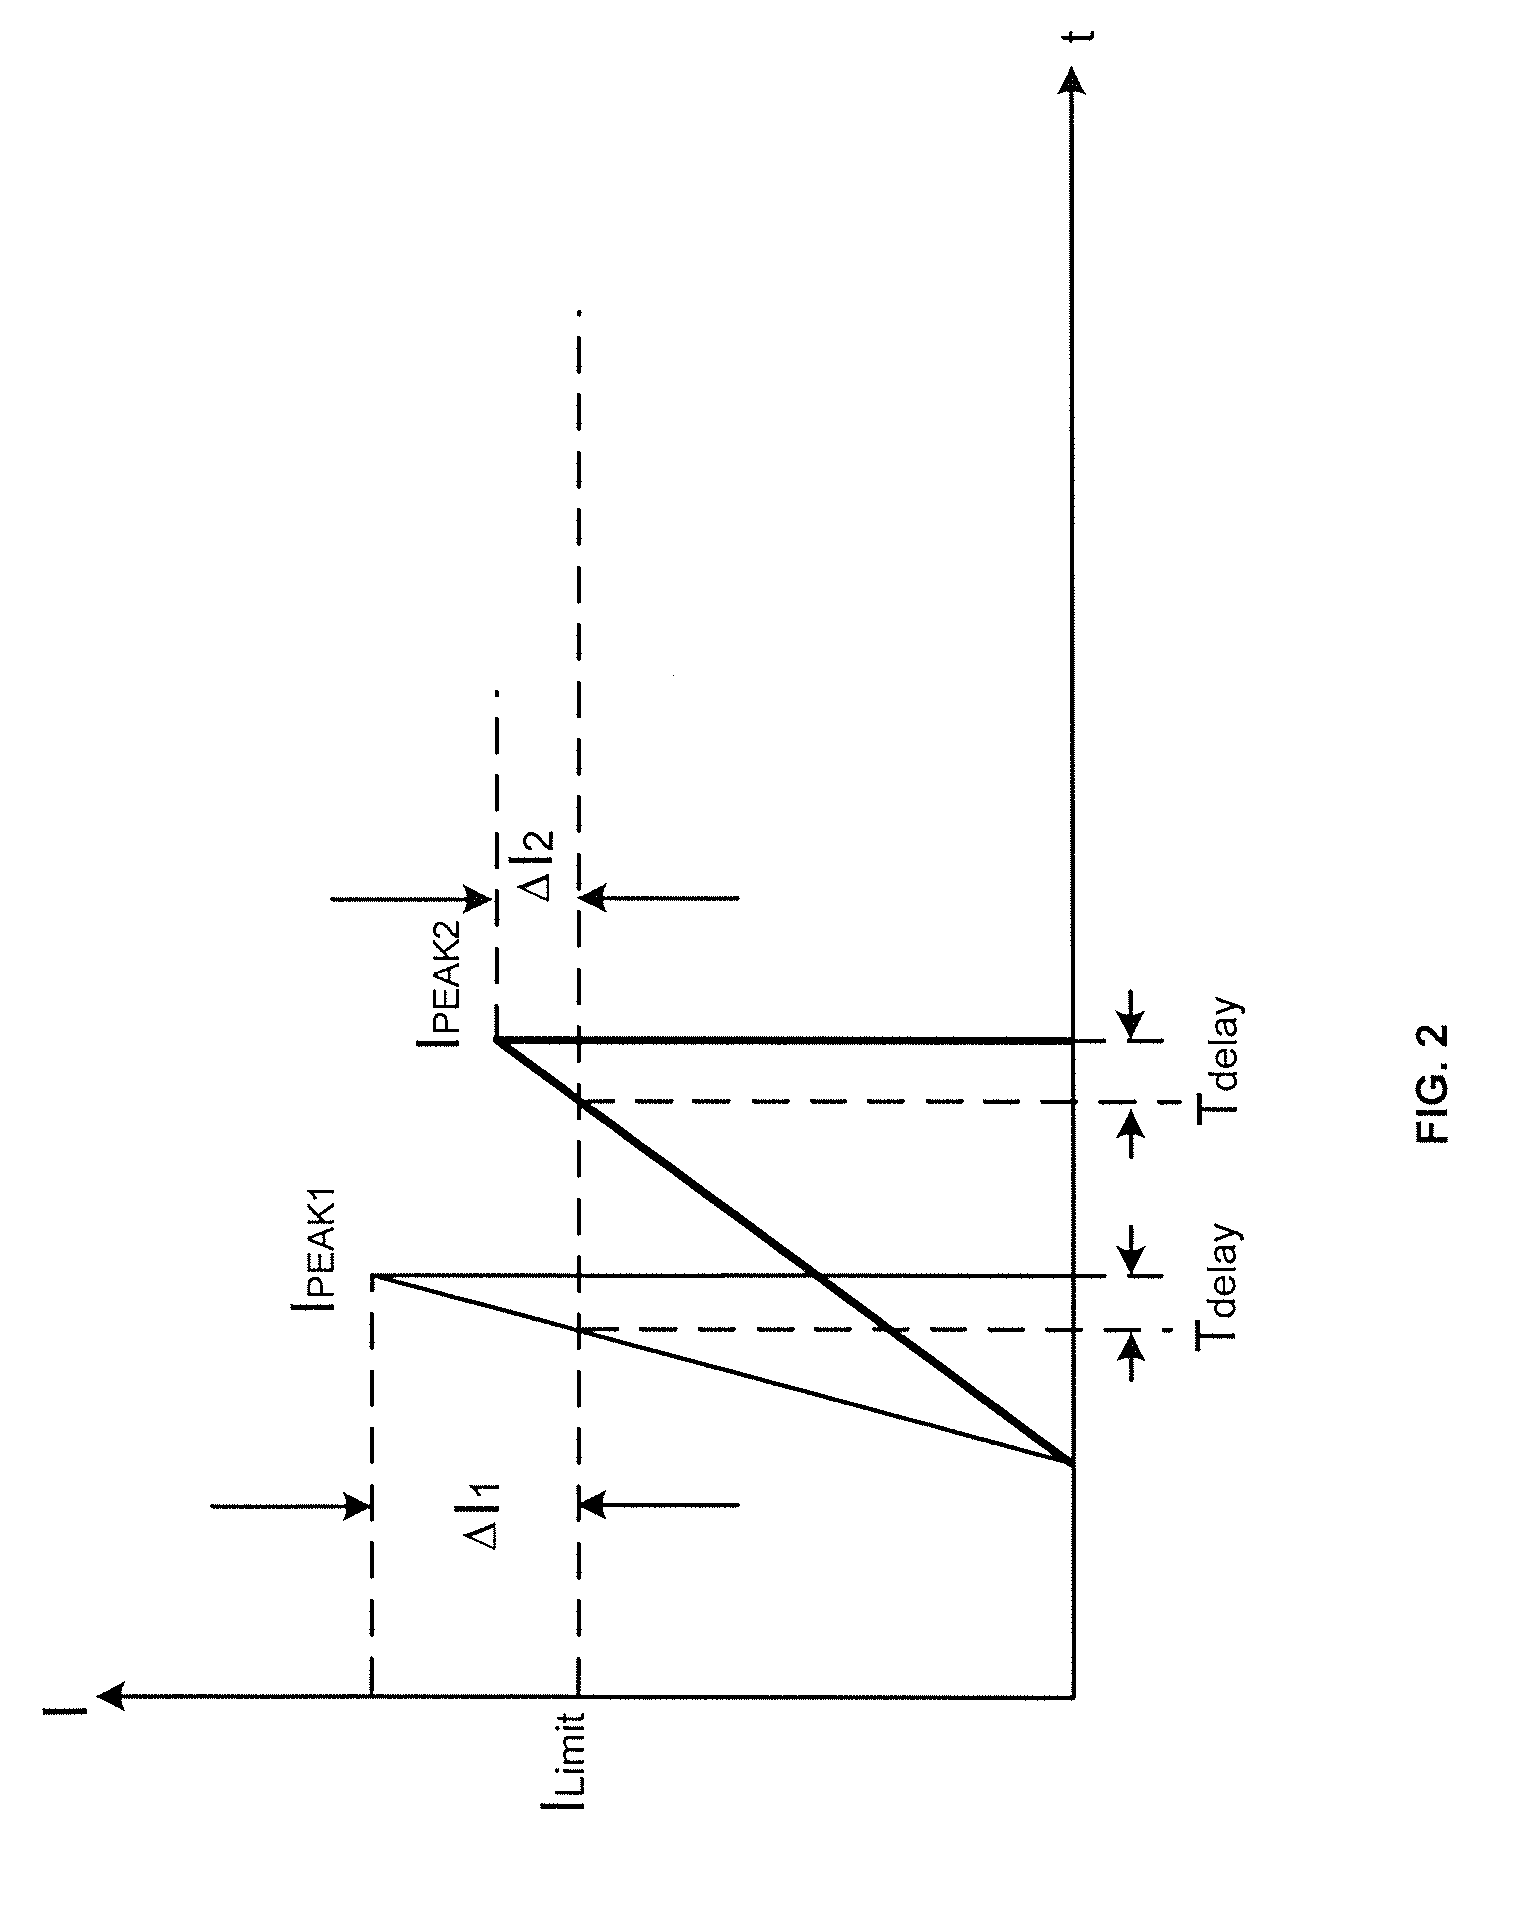 System and method providing over current protection based on duty cycle information for power converter